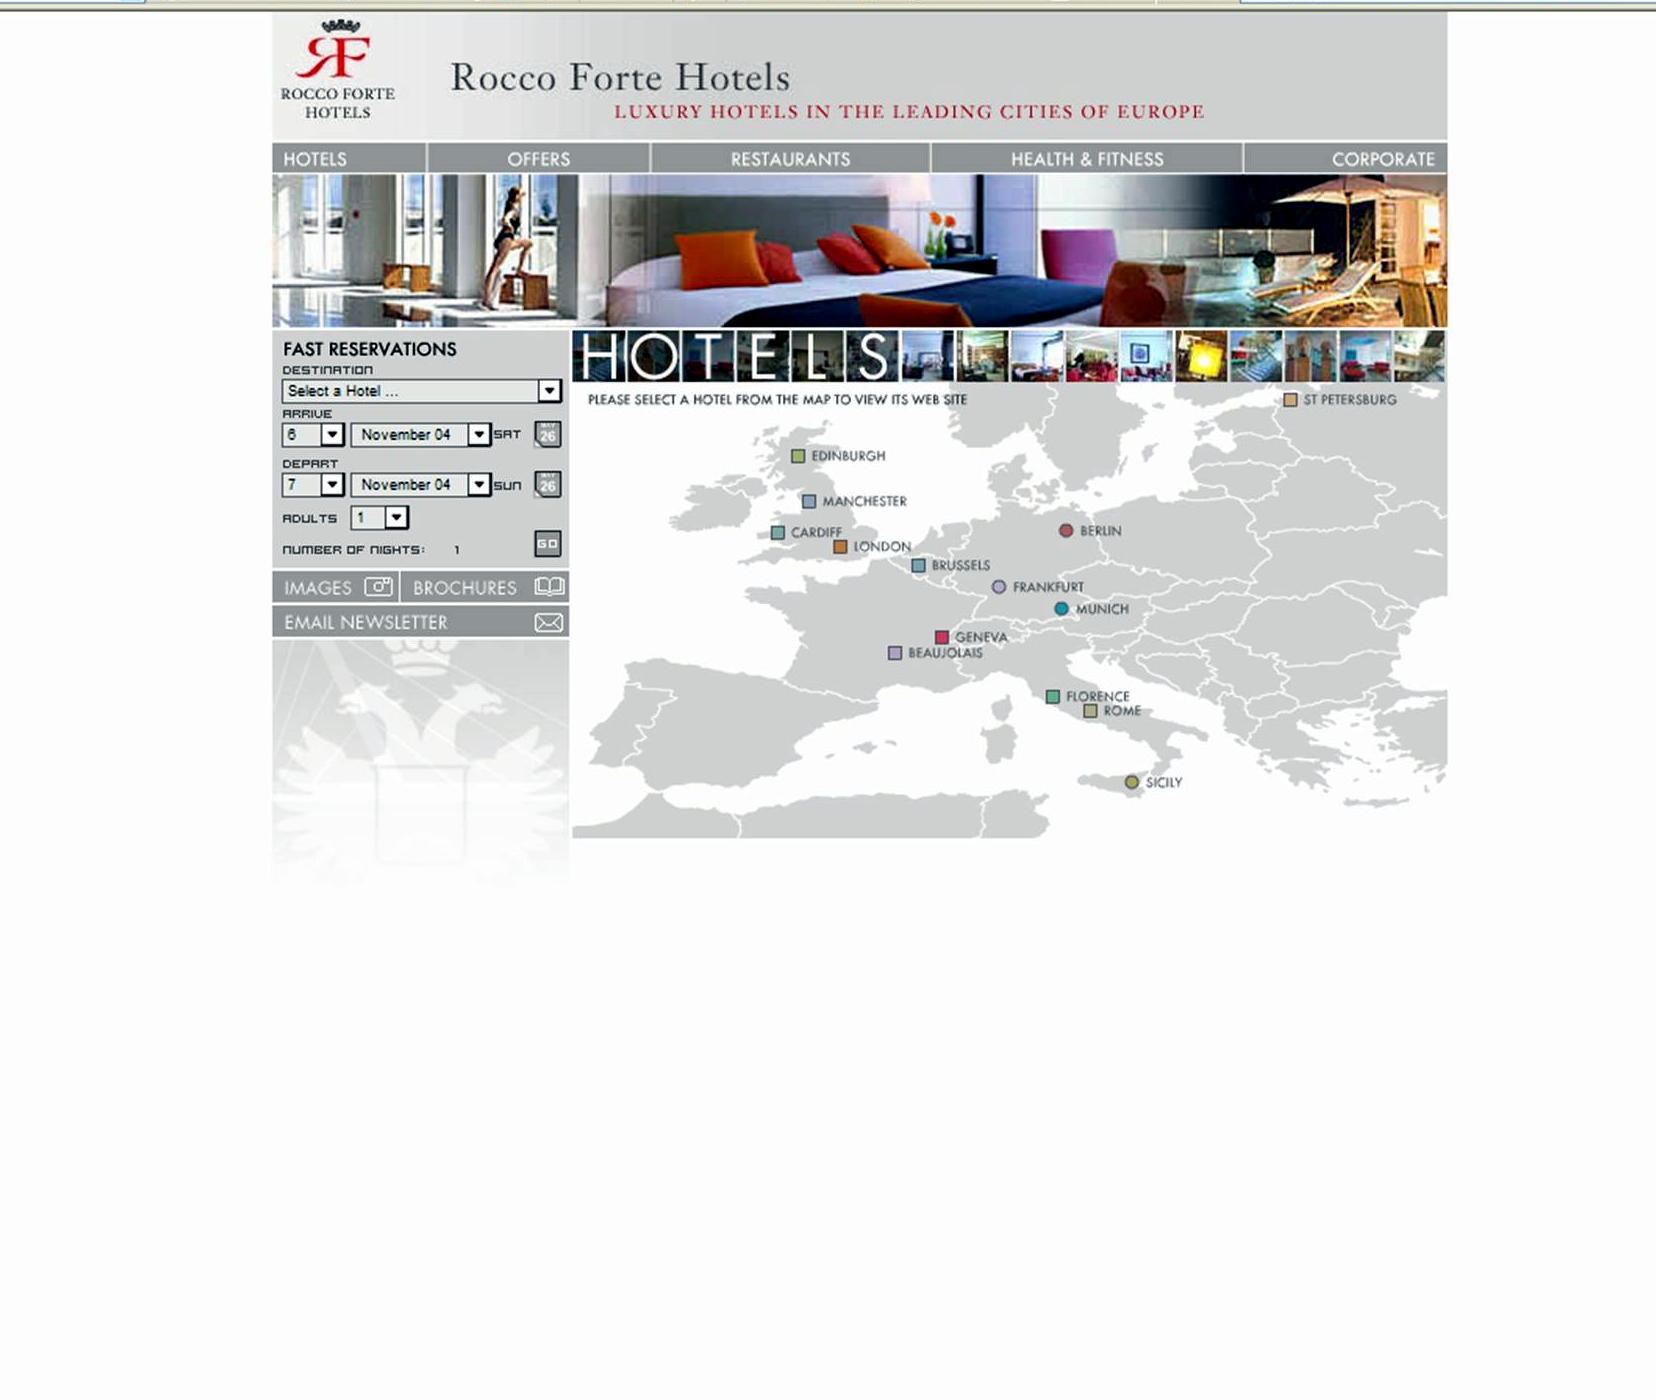 Rocco Forte Hotels image